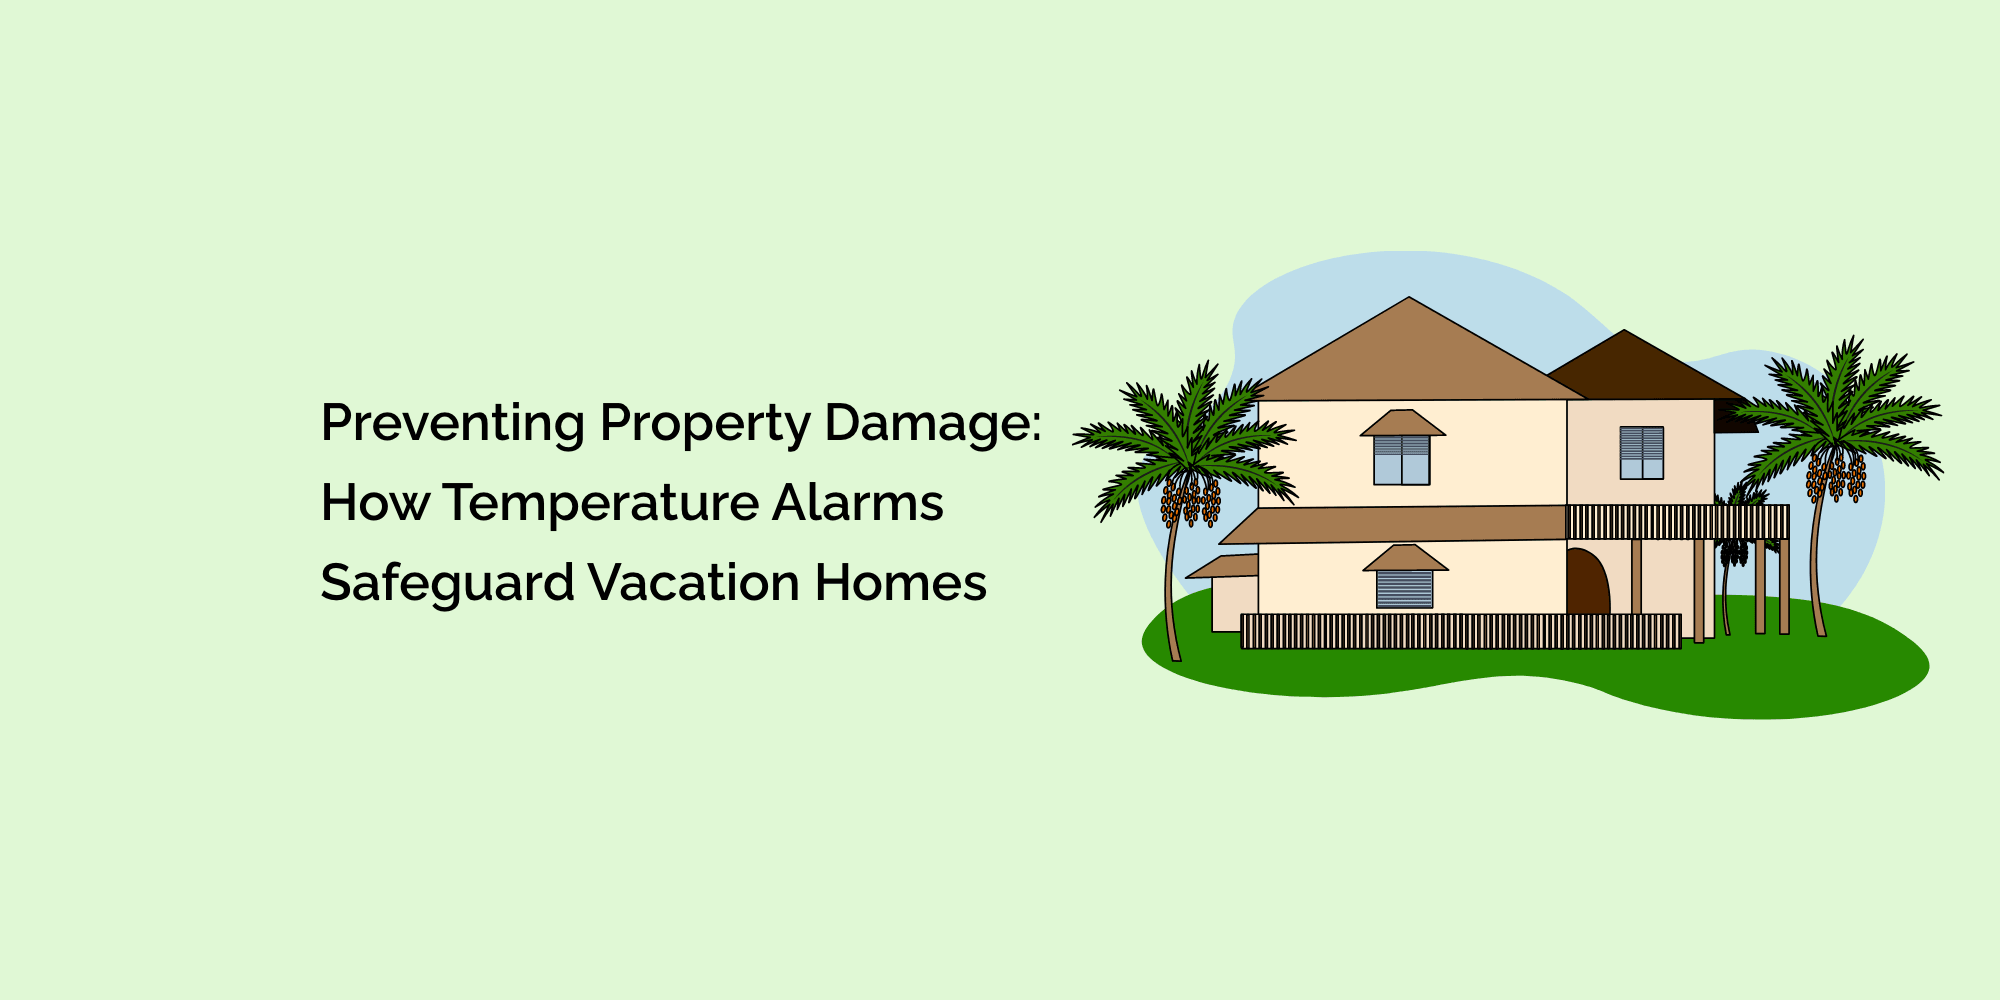 Preventing Property Damage: How Temperature Alarms Safeguard Vacation Homes